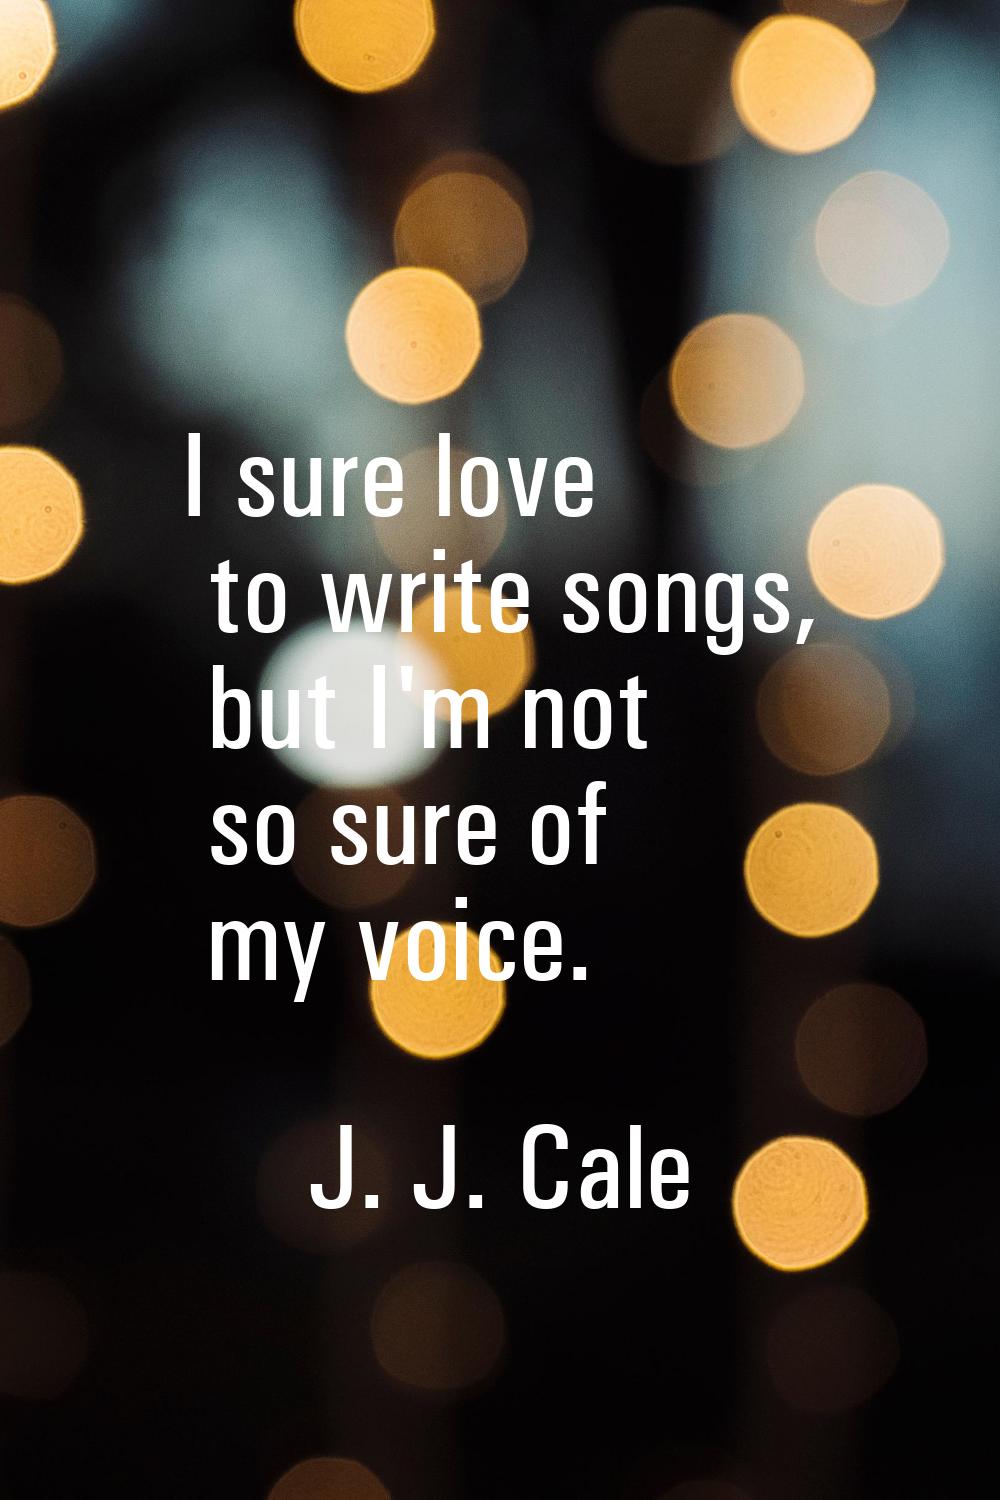 I sure love to write songs, but I'm not so sure of my voice.